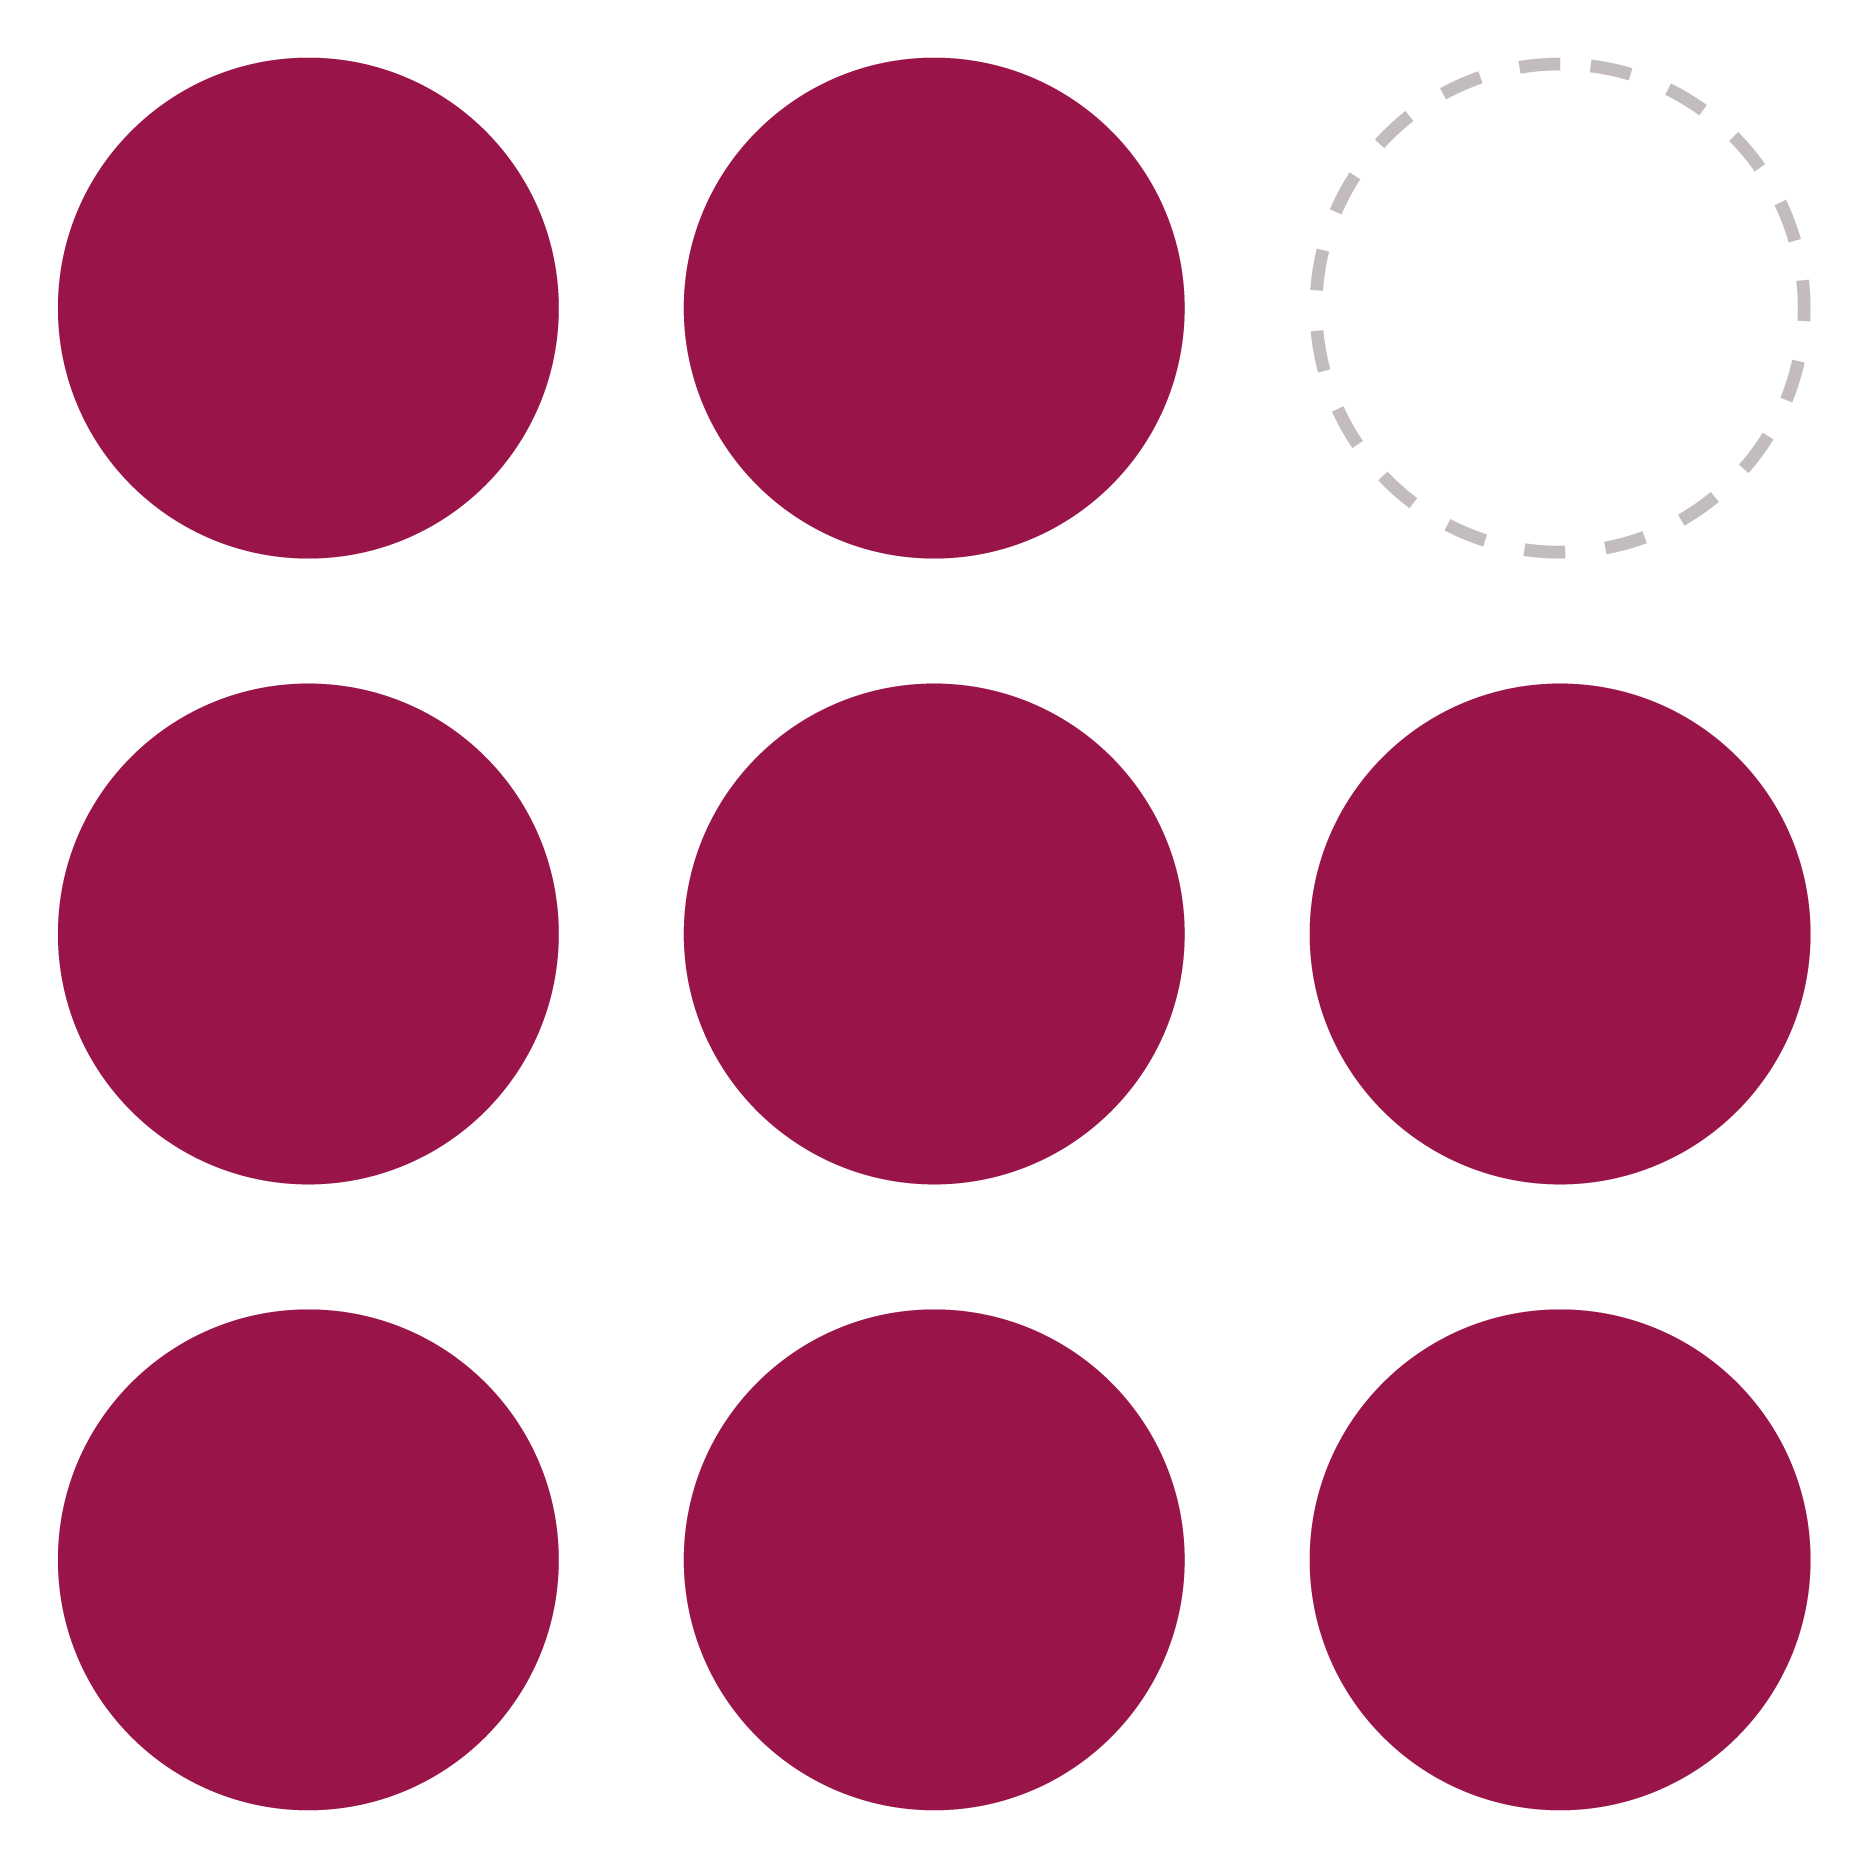 3 by 3 arrangement of circles on a pink background. 8 are colored red, 1 is empty with a gray dashed outline.